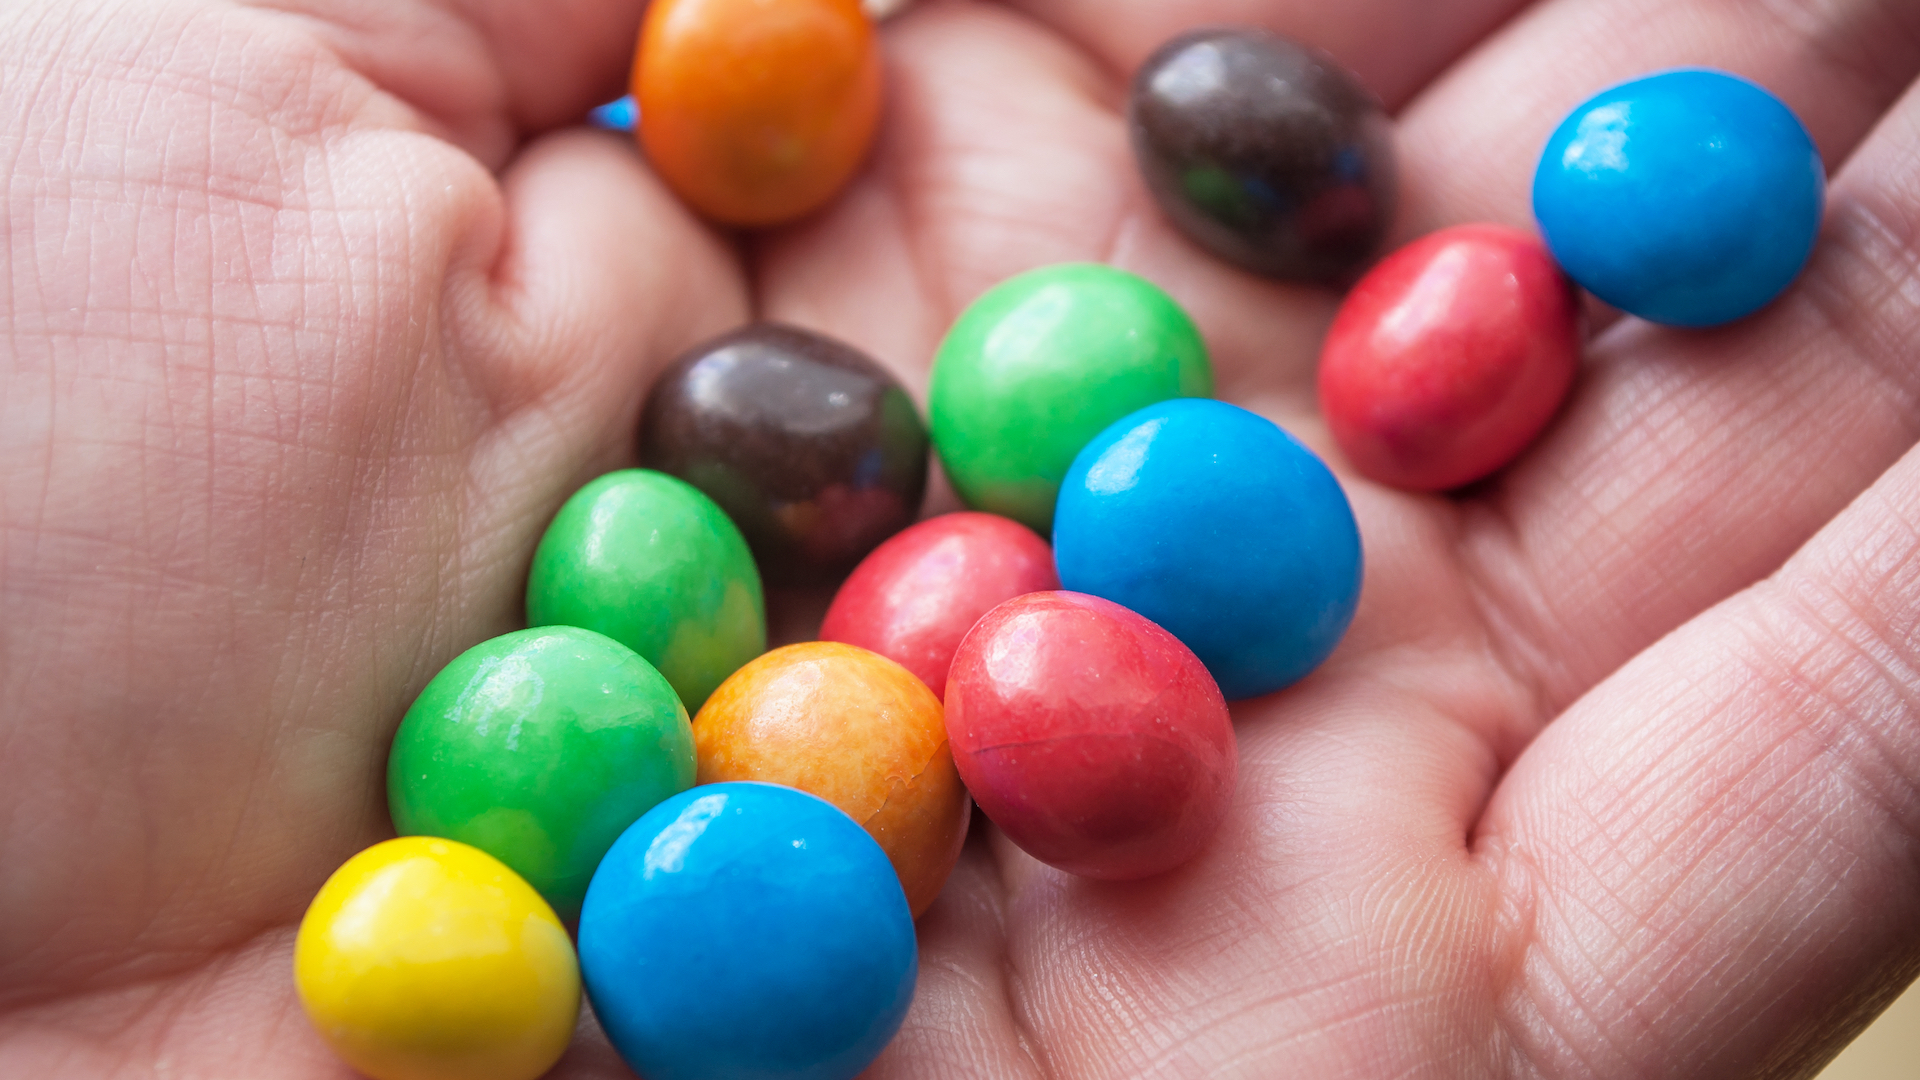 A handful of M&M's